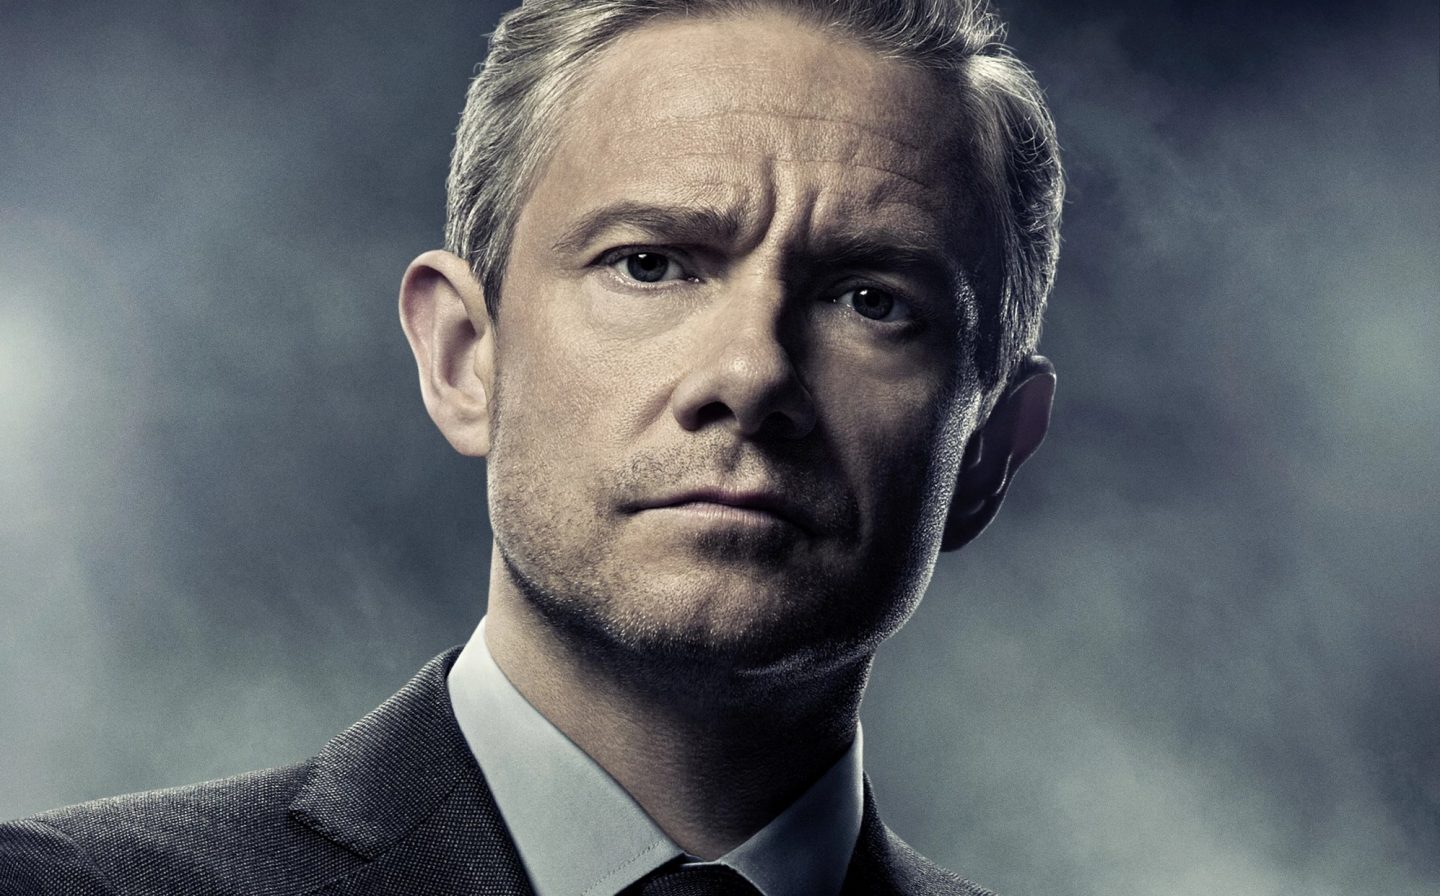 Black Panther 2: Martin Freeman Also Curious To See How The Script Works Without  Boseman